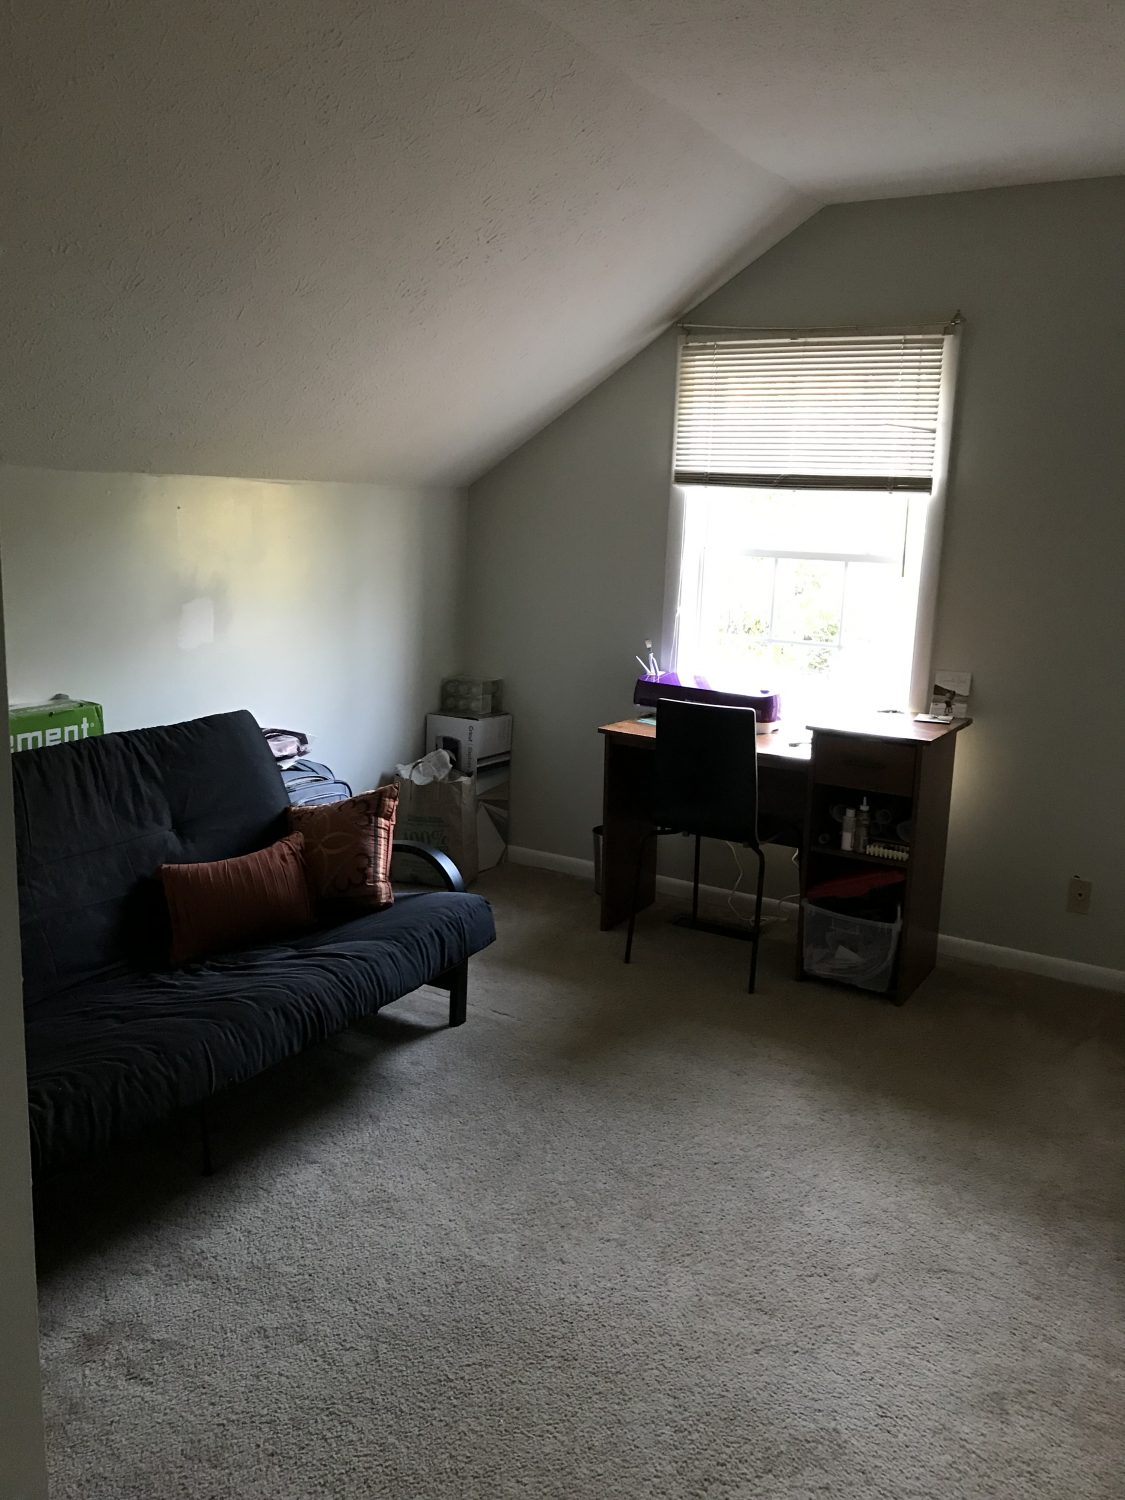 a room with a couch and desk